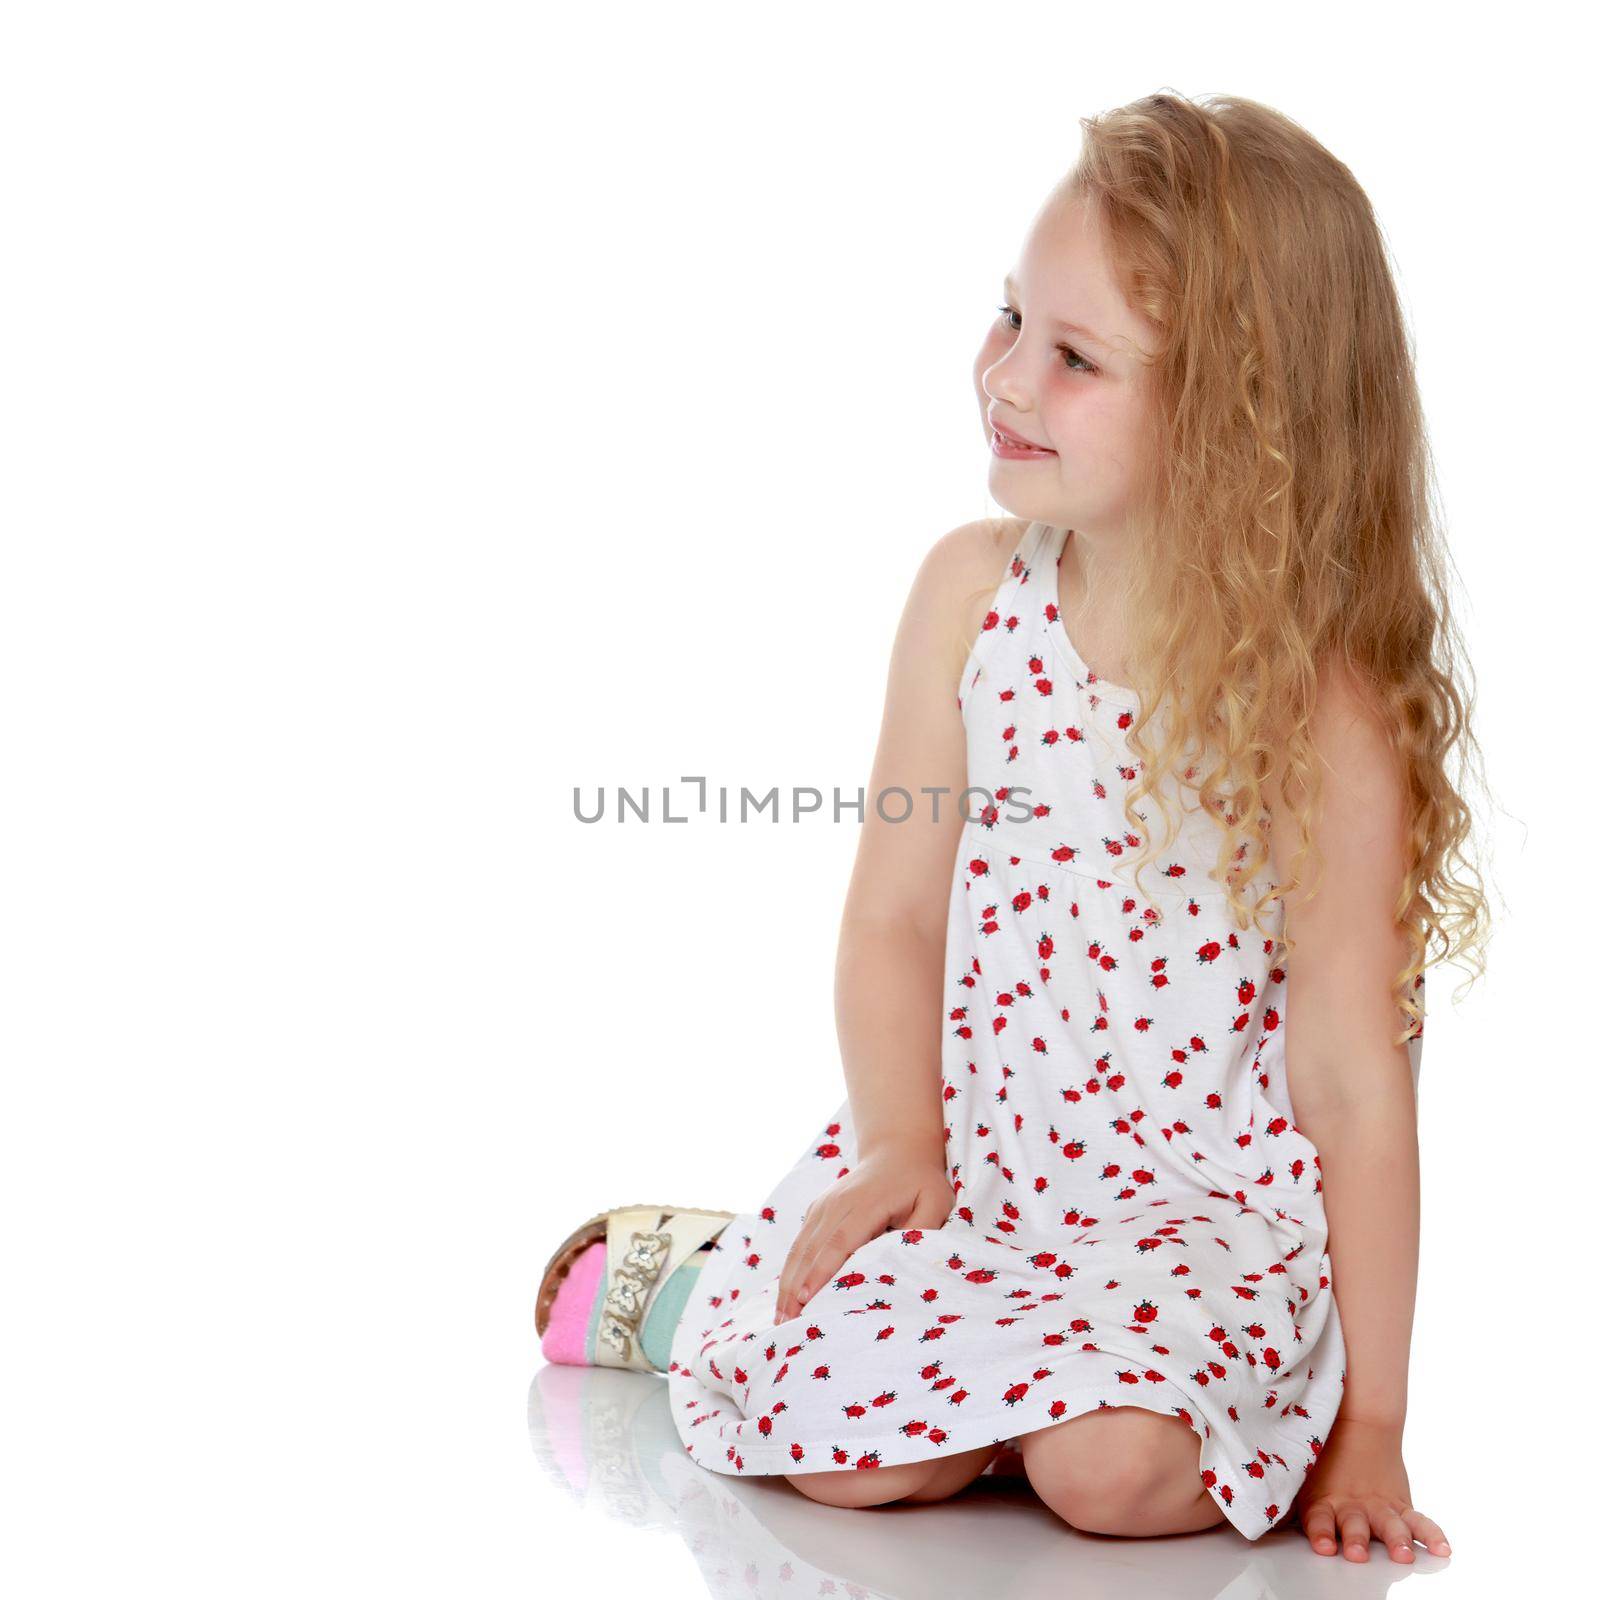 Sad little girl concept of the meaning of life and psychological adaptation of the child in the family and society. Isolated over white background